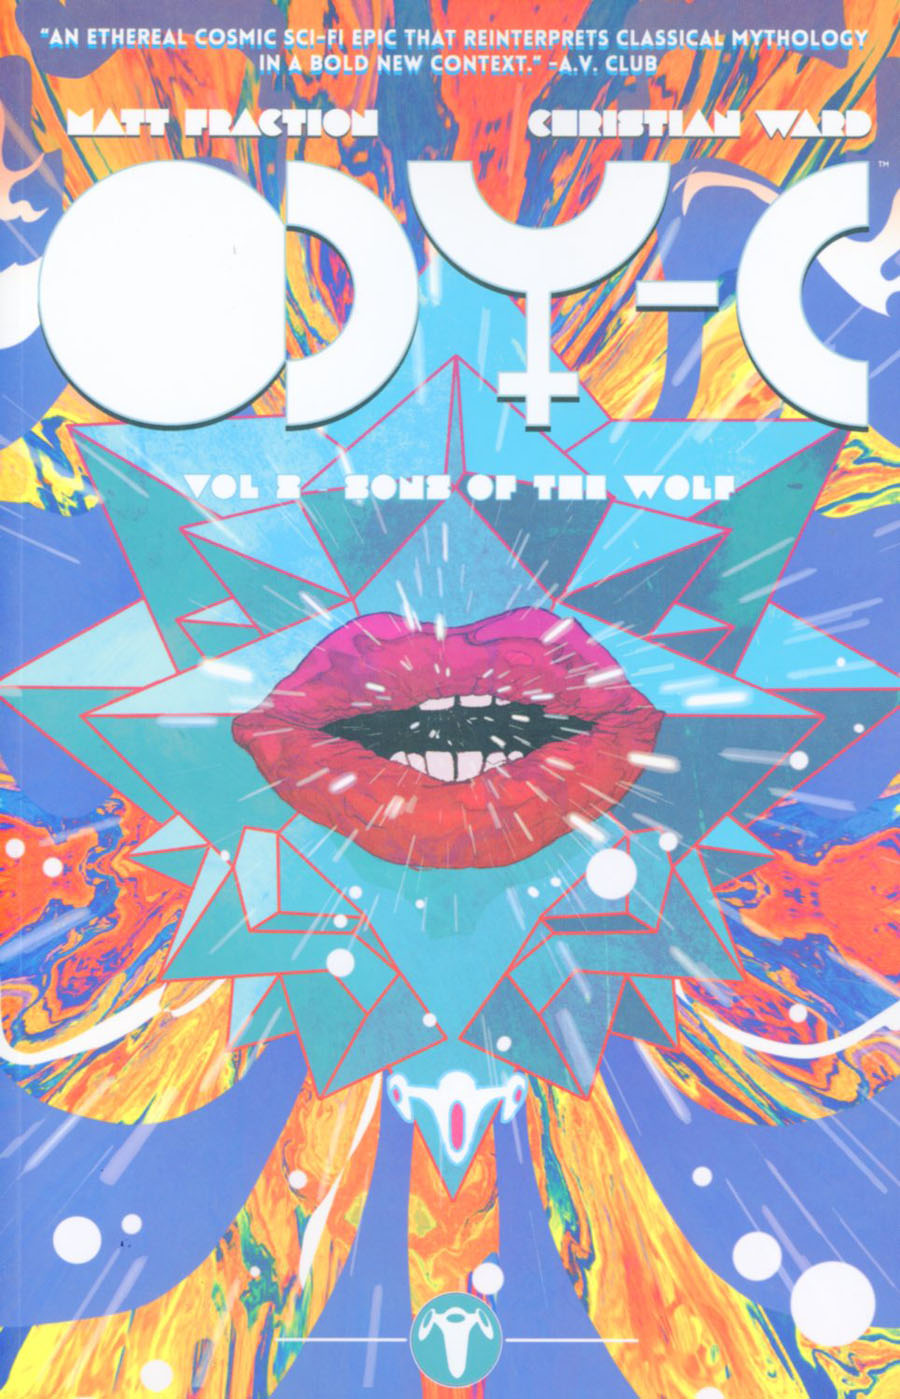 Ody-C Vol 2 Sons Of The Wolf TP